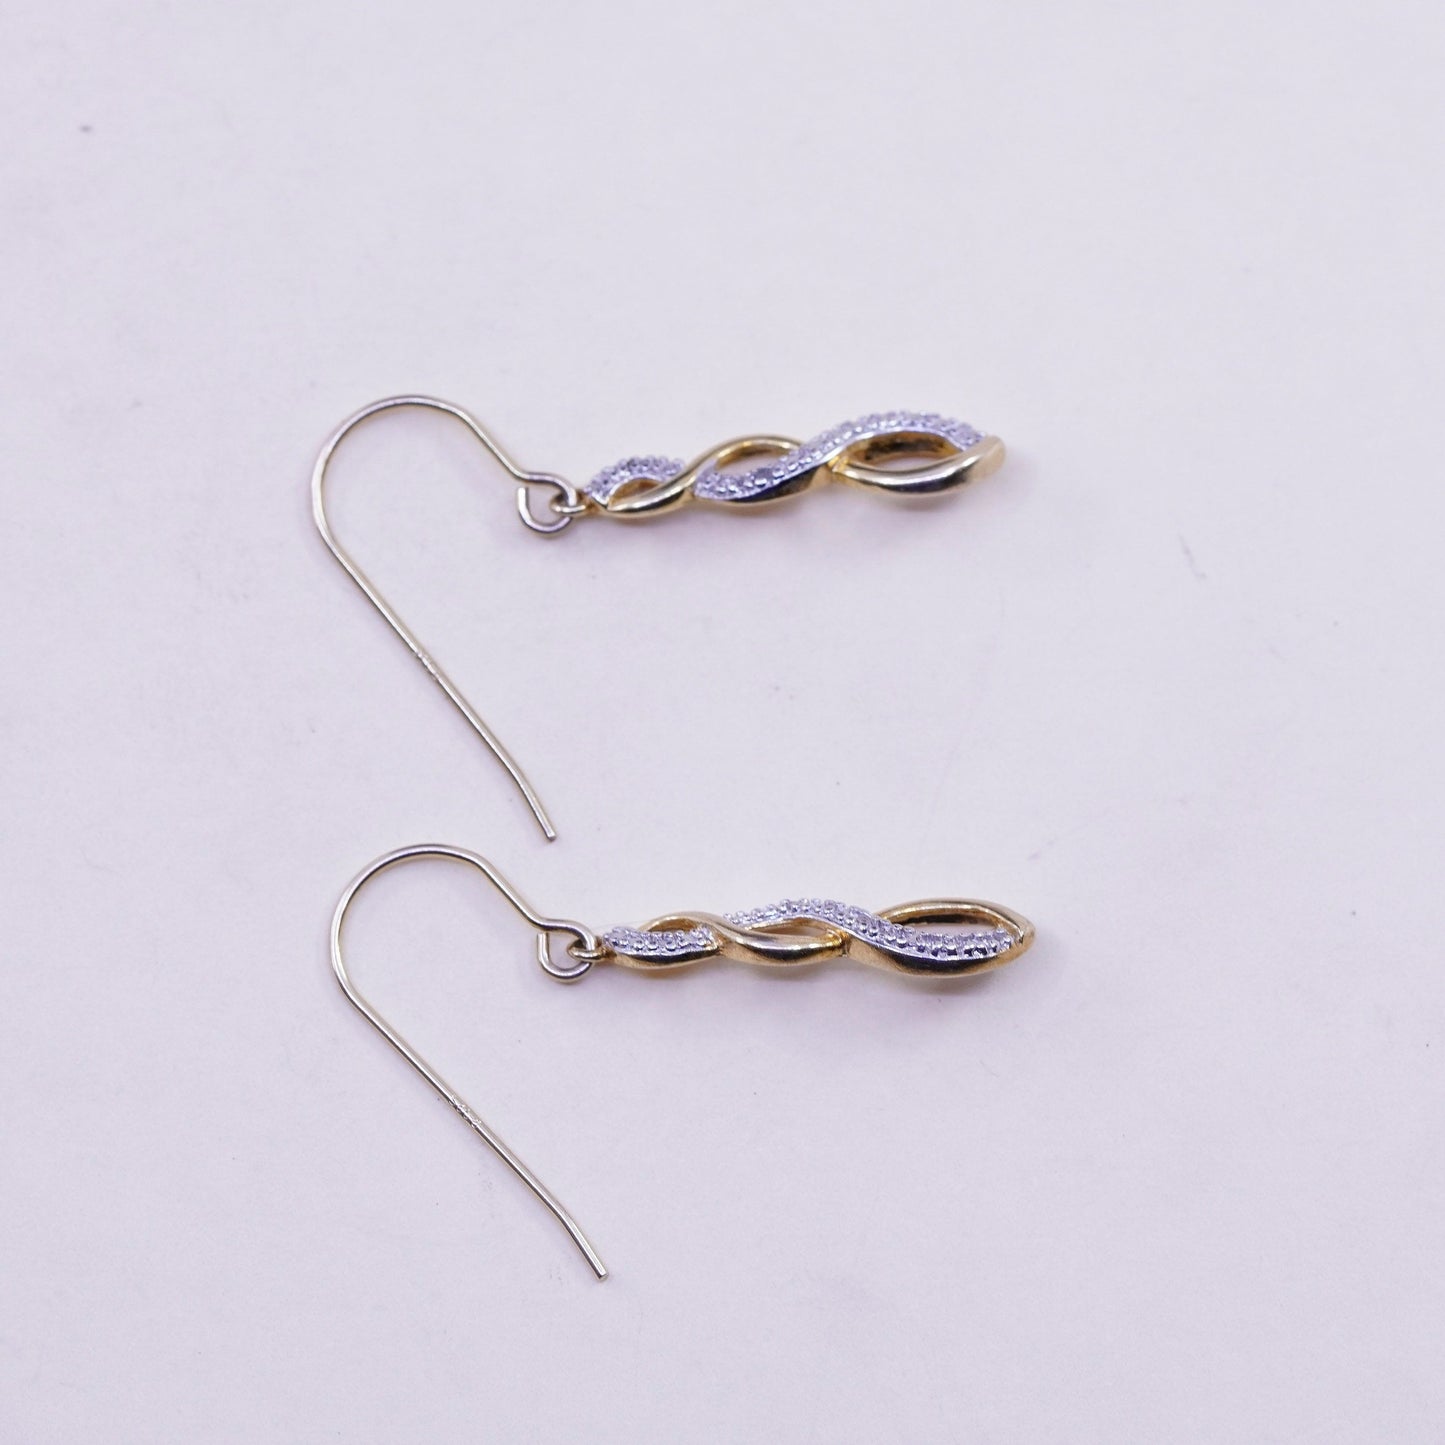 Vintage vermeil gold over sterling silver earrings, 925 twisted dangles diamond